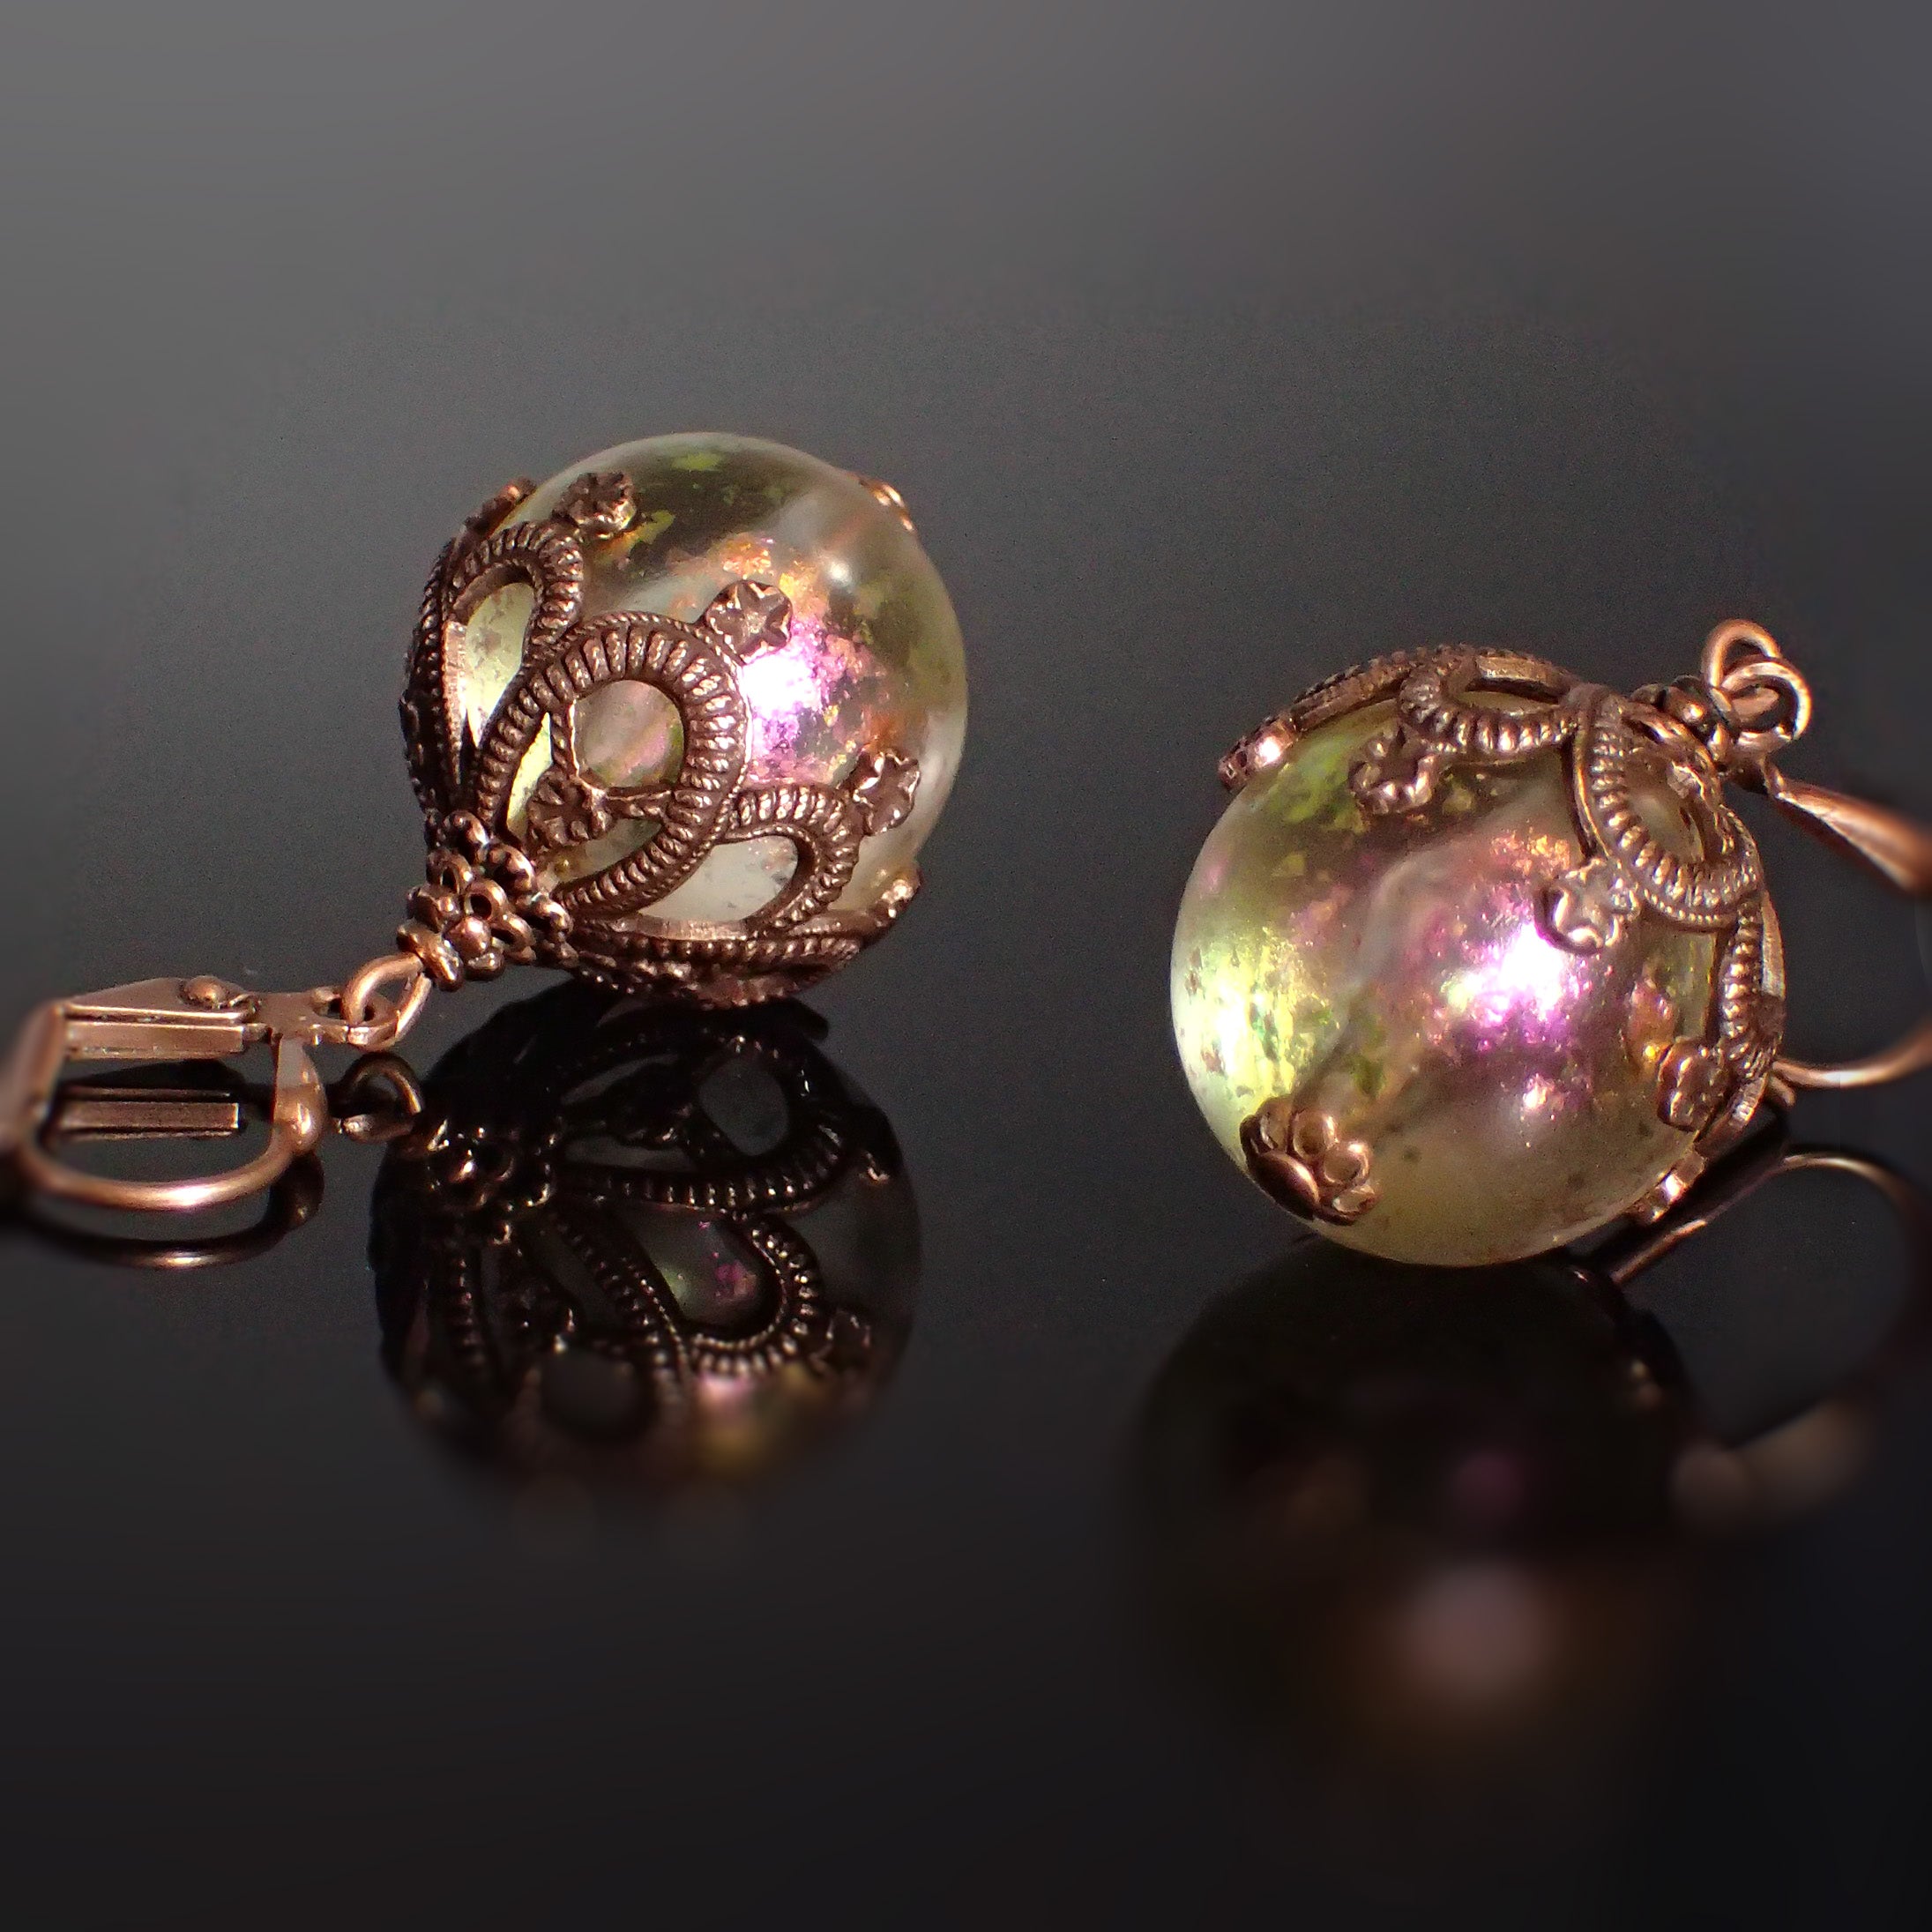 Iridescent Bead Earrings Pink and Green with Victorian Style Antiqued Copper Floral Filigree